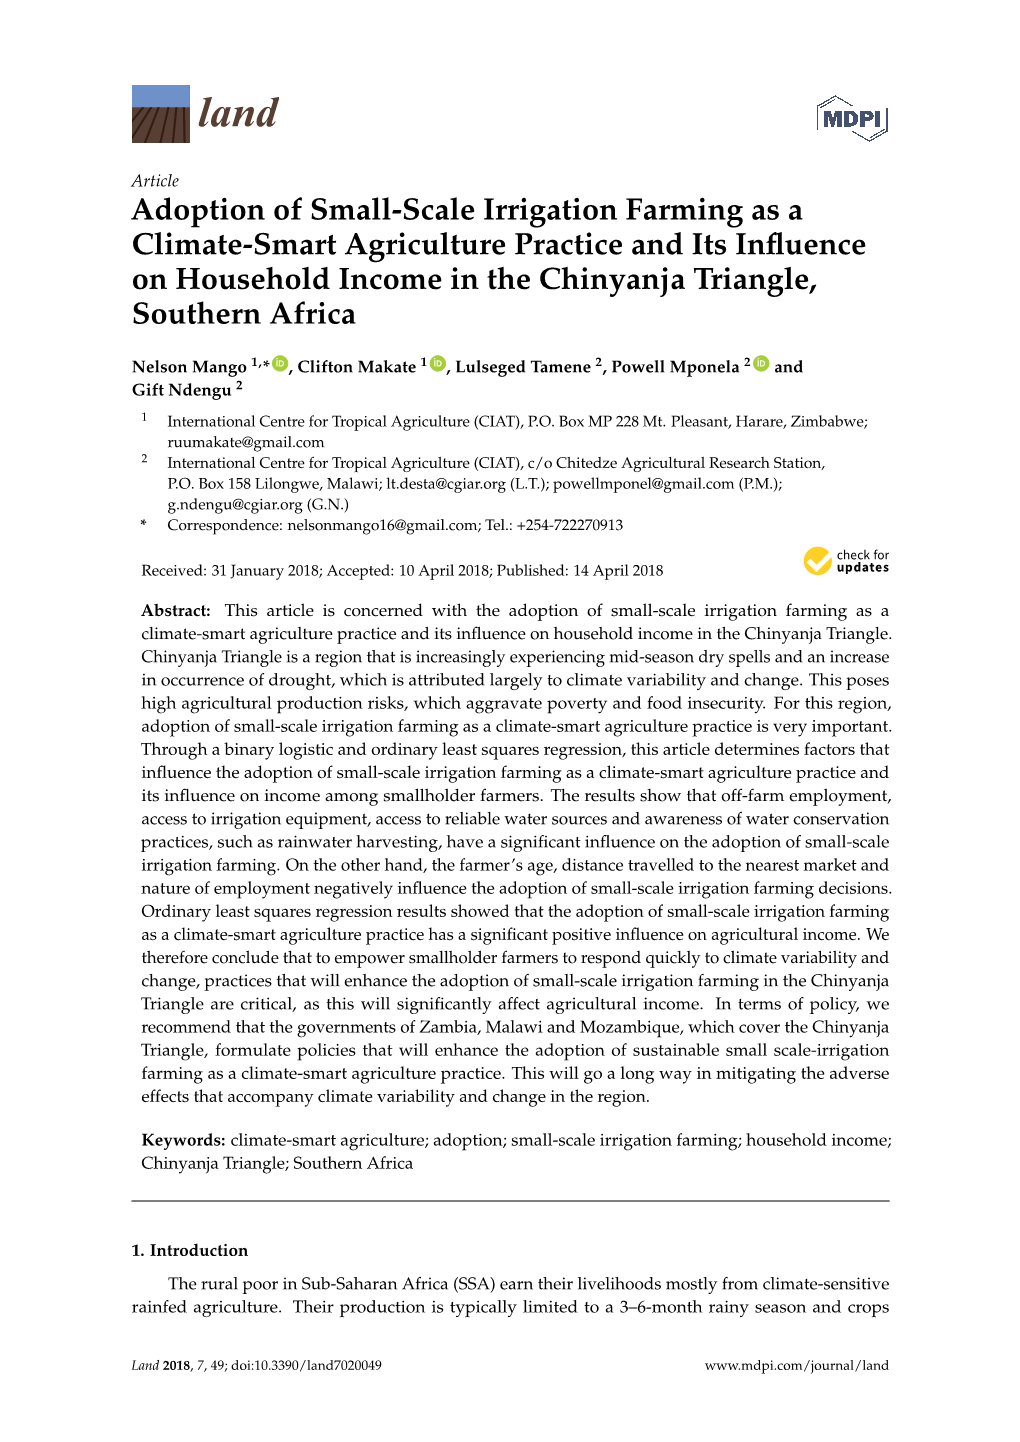 Adoption of Small-Scale Irrigation Farming As a Climate-Smart Agriculture Practice and Its Inﬂuence on Household Income in the Chinyanja Triangle, Southern Africa